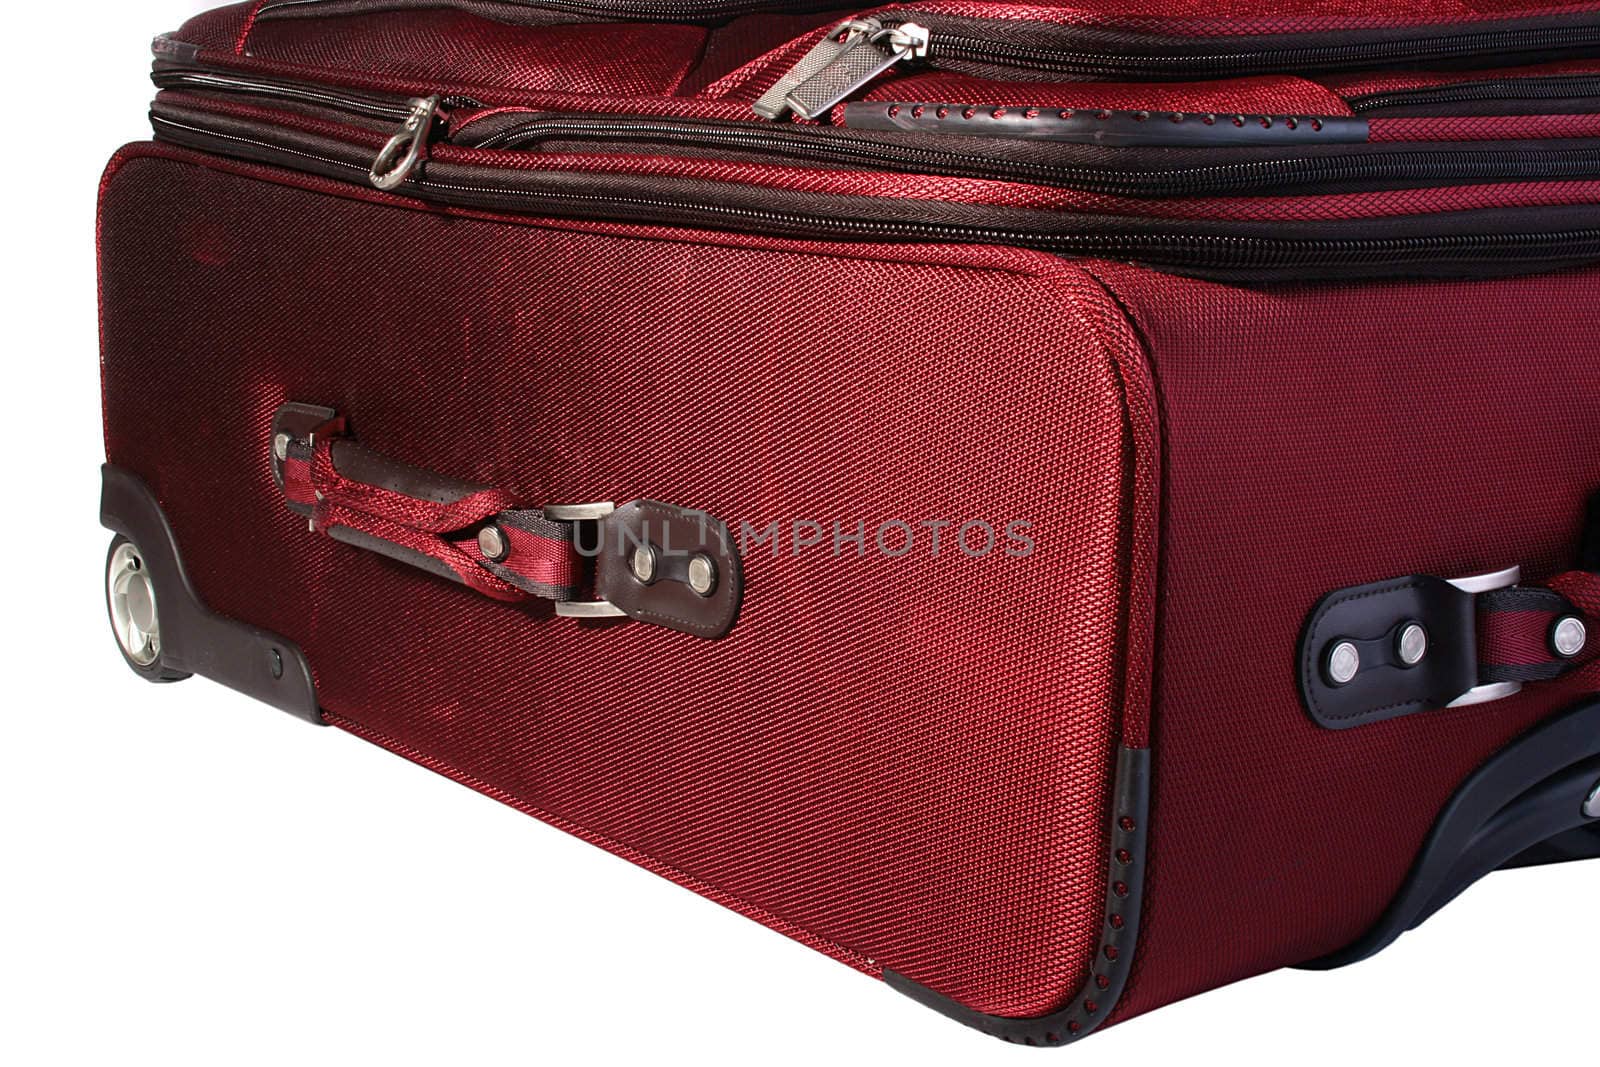 The big red suitcase on castors, is convenient on travel.